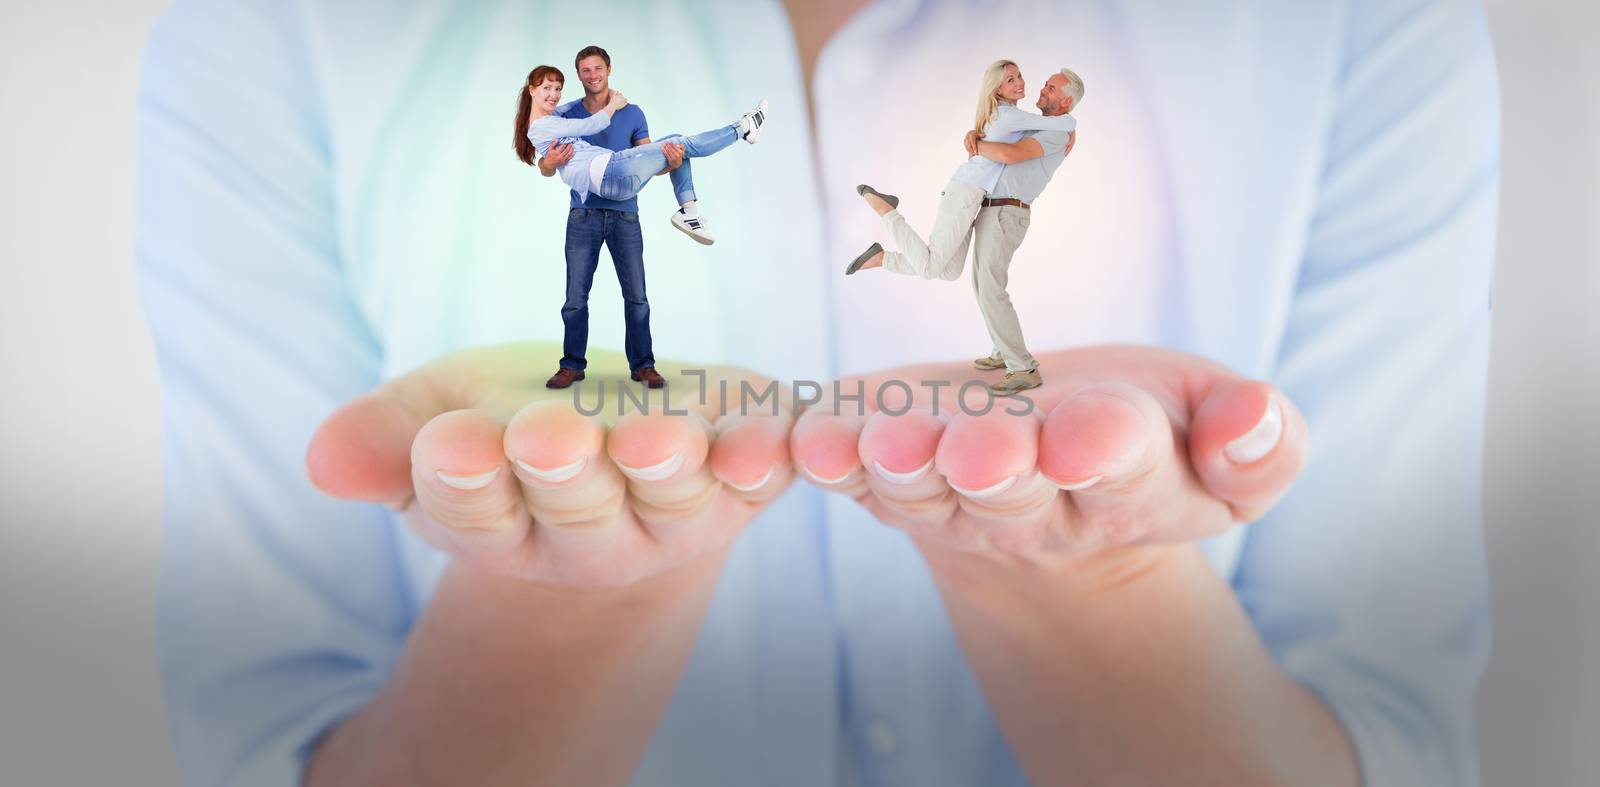 Composite image of man lifting up his girlfriend by Wavebreakmedia